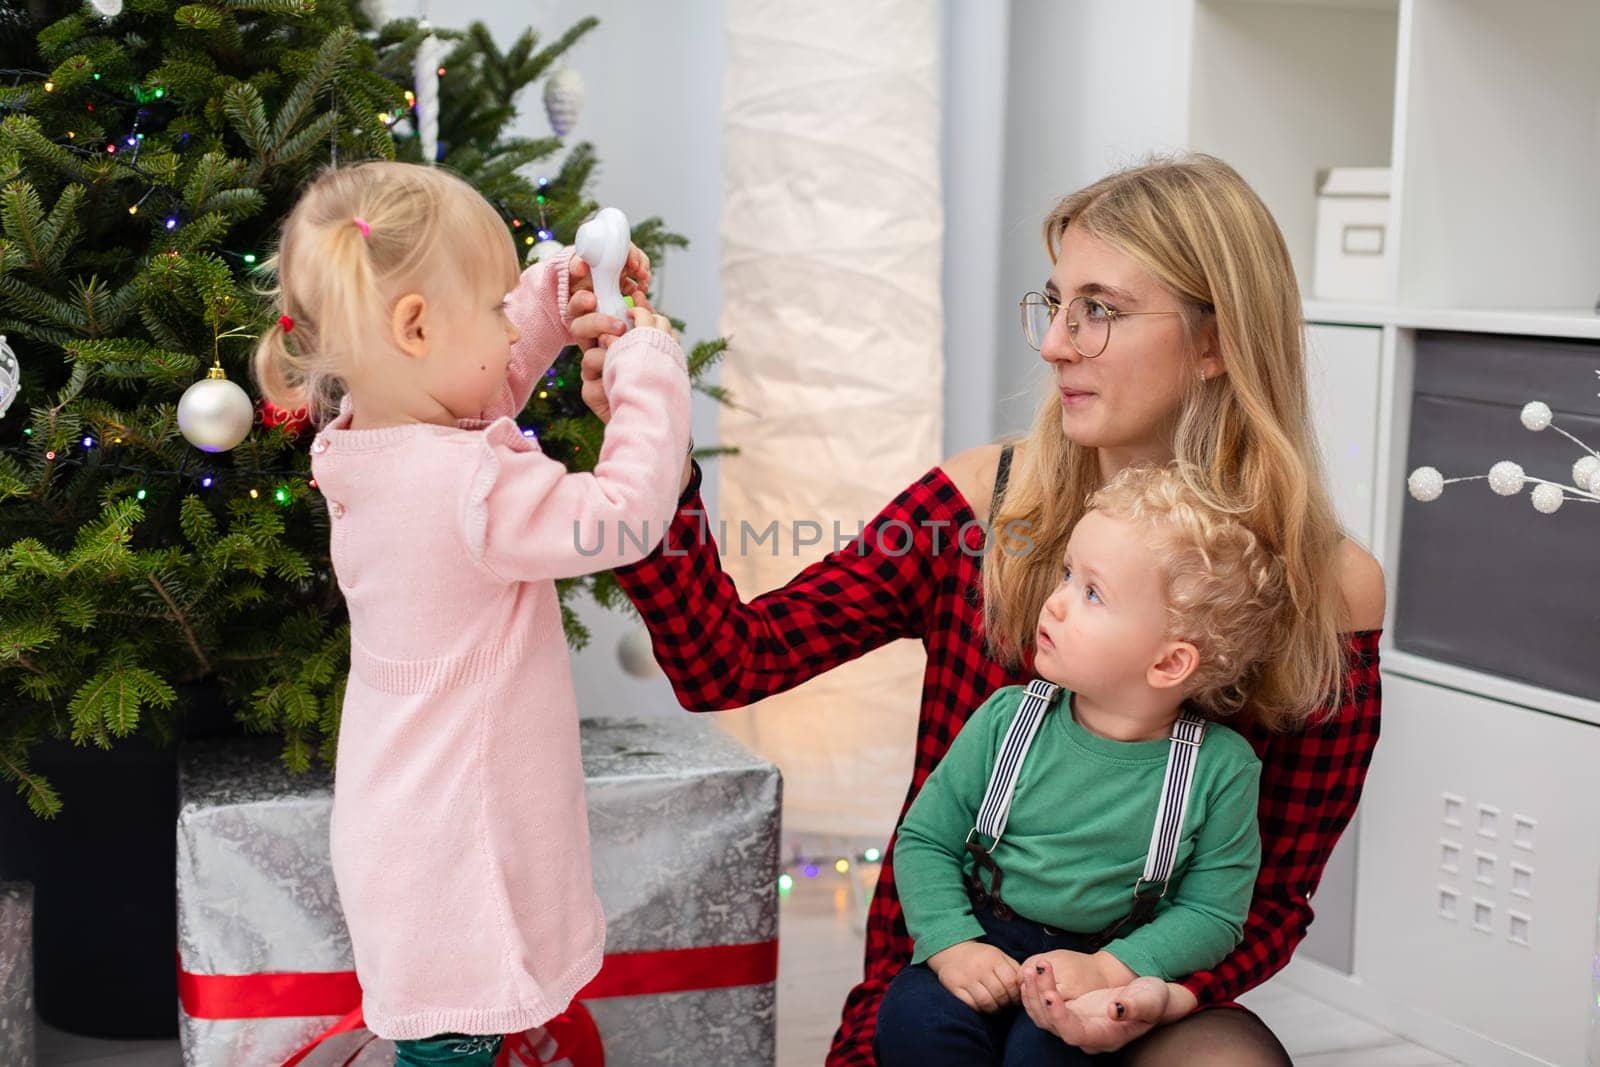 In a room decorated with Christmas ornaments there is a woman and two young children. The woman is playing with a boy and a girl. The woman has blonde hair and glasses. They are all sitting by the Christmas tree.